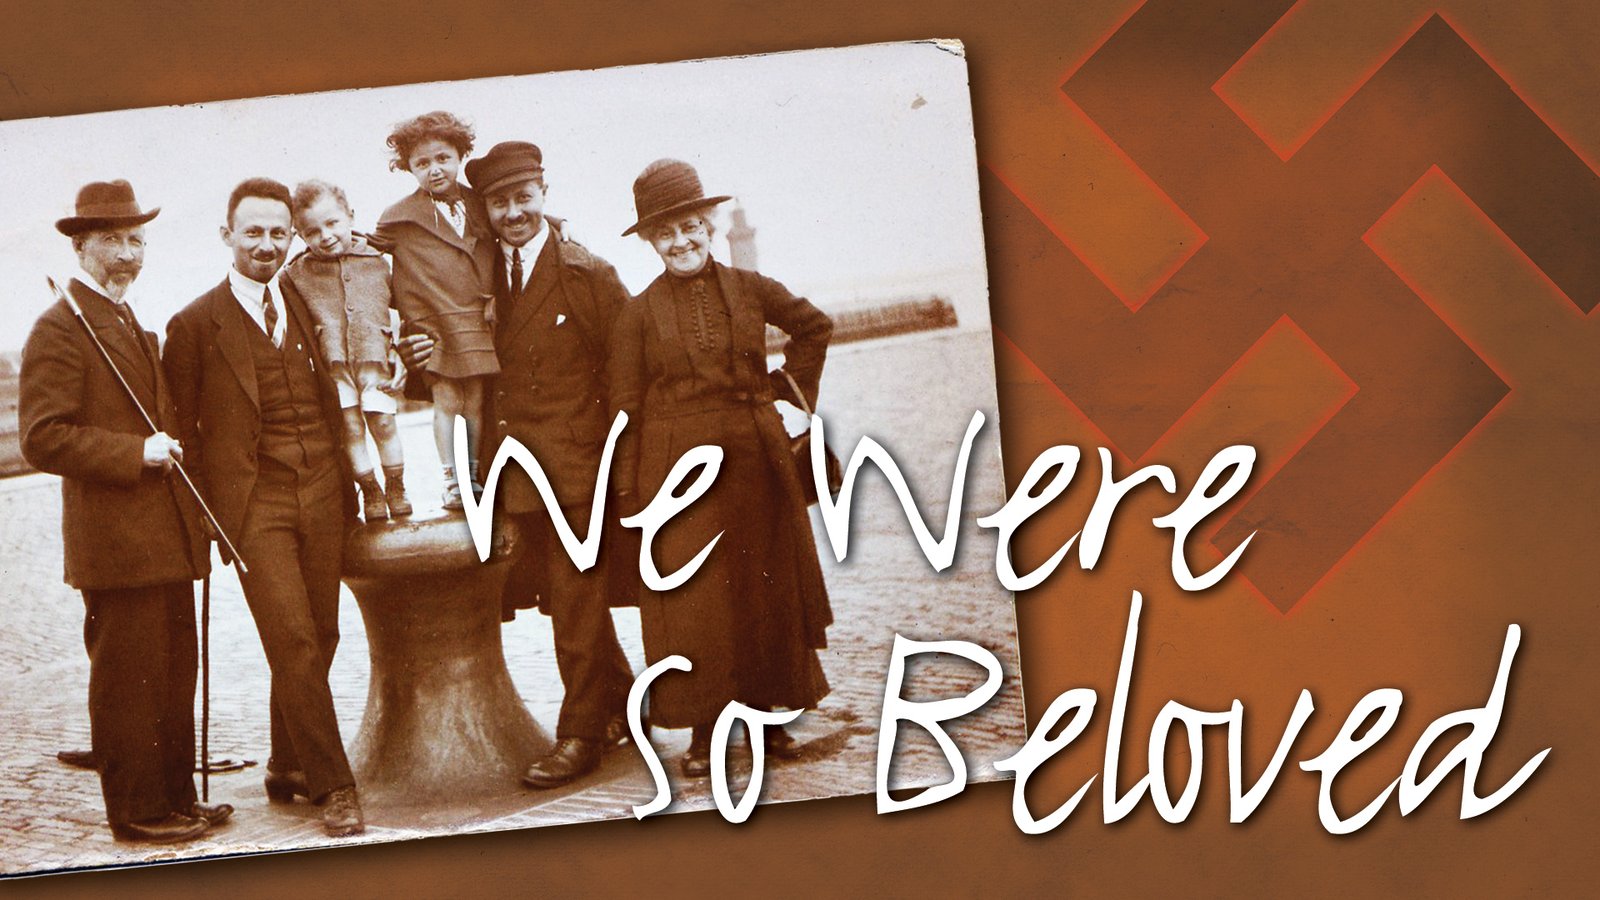 We Were So Beloved - The Jewish Community in New York During WWII